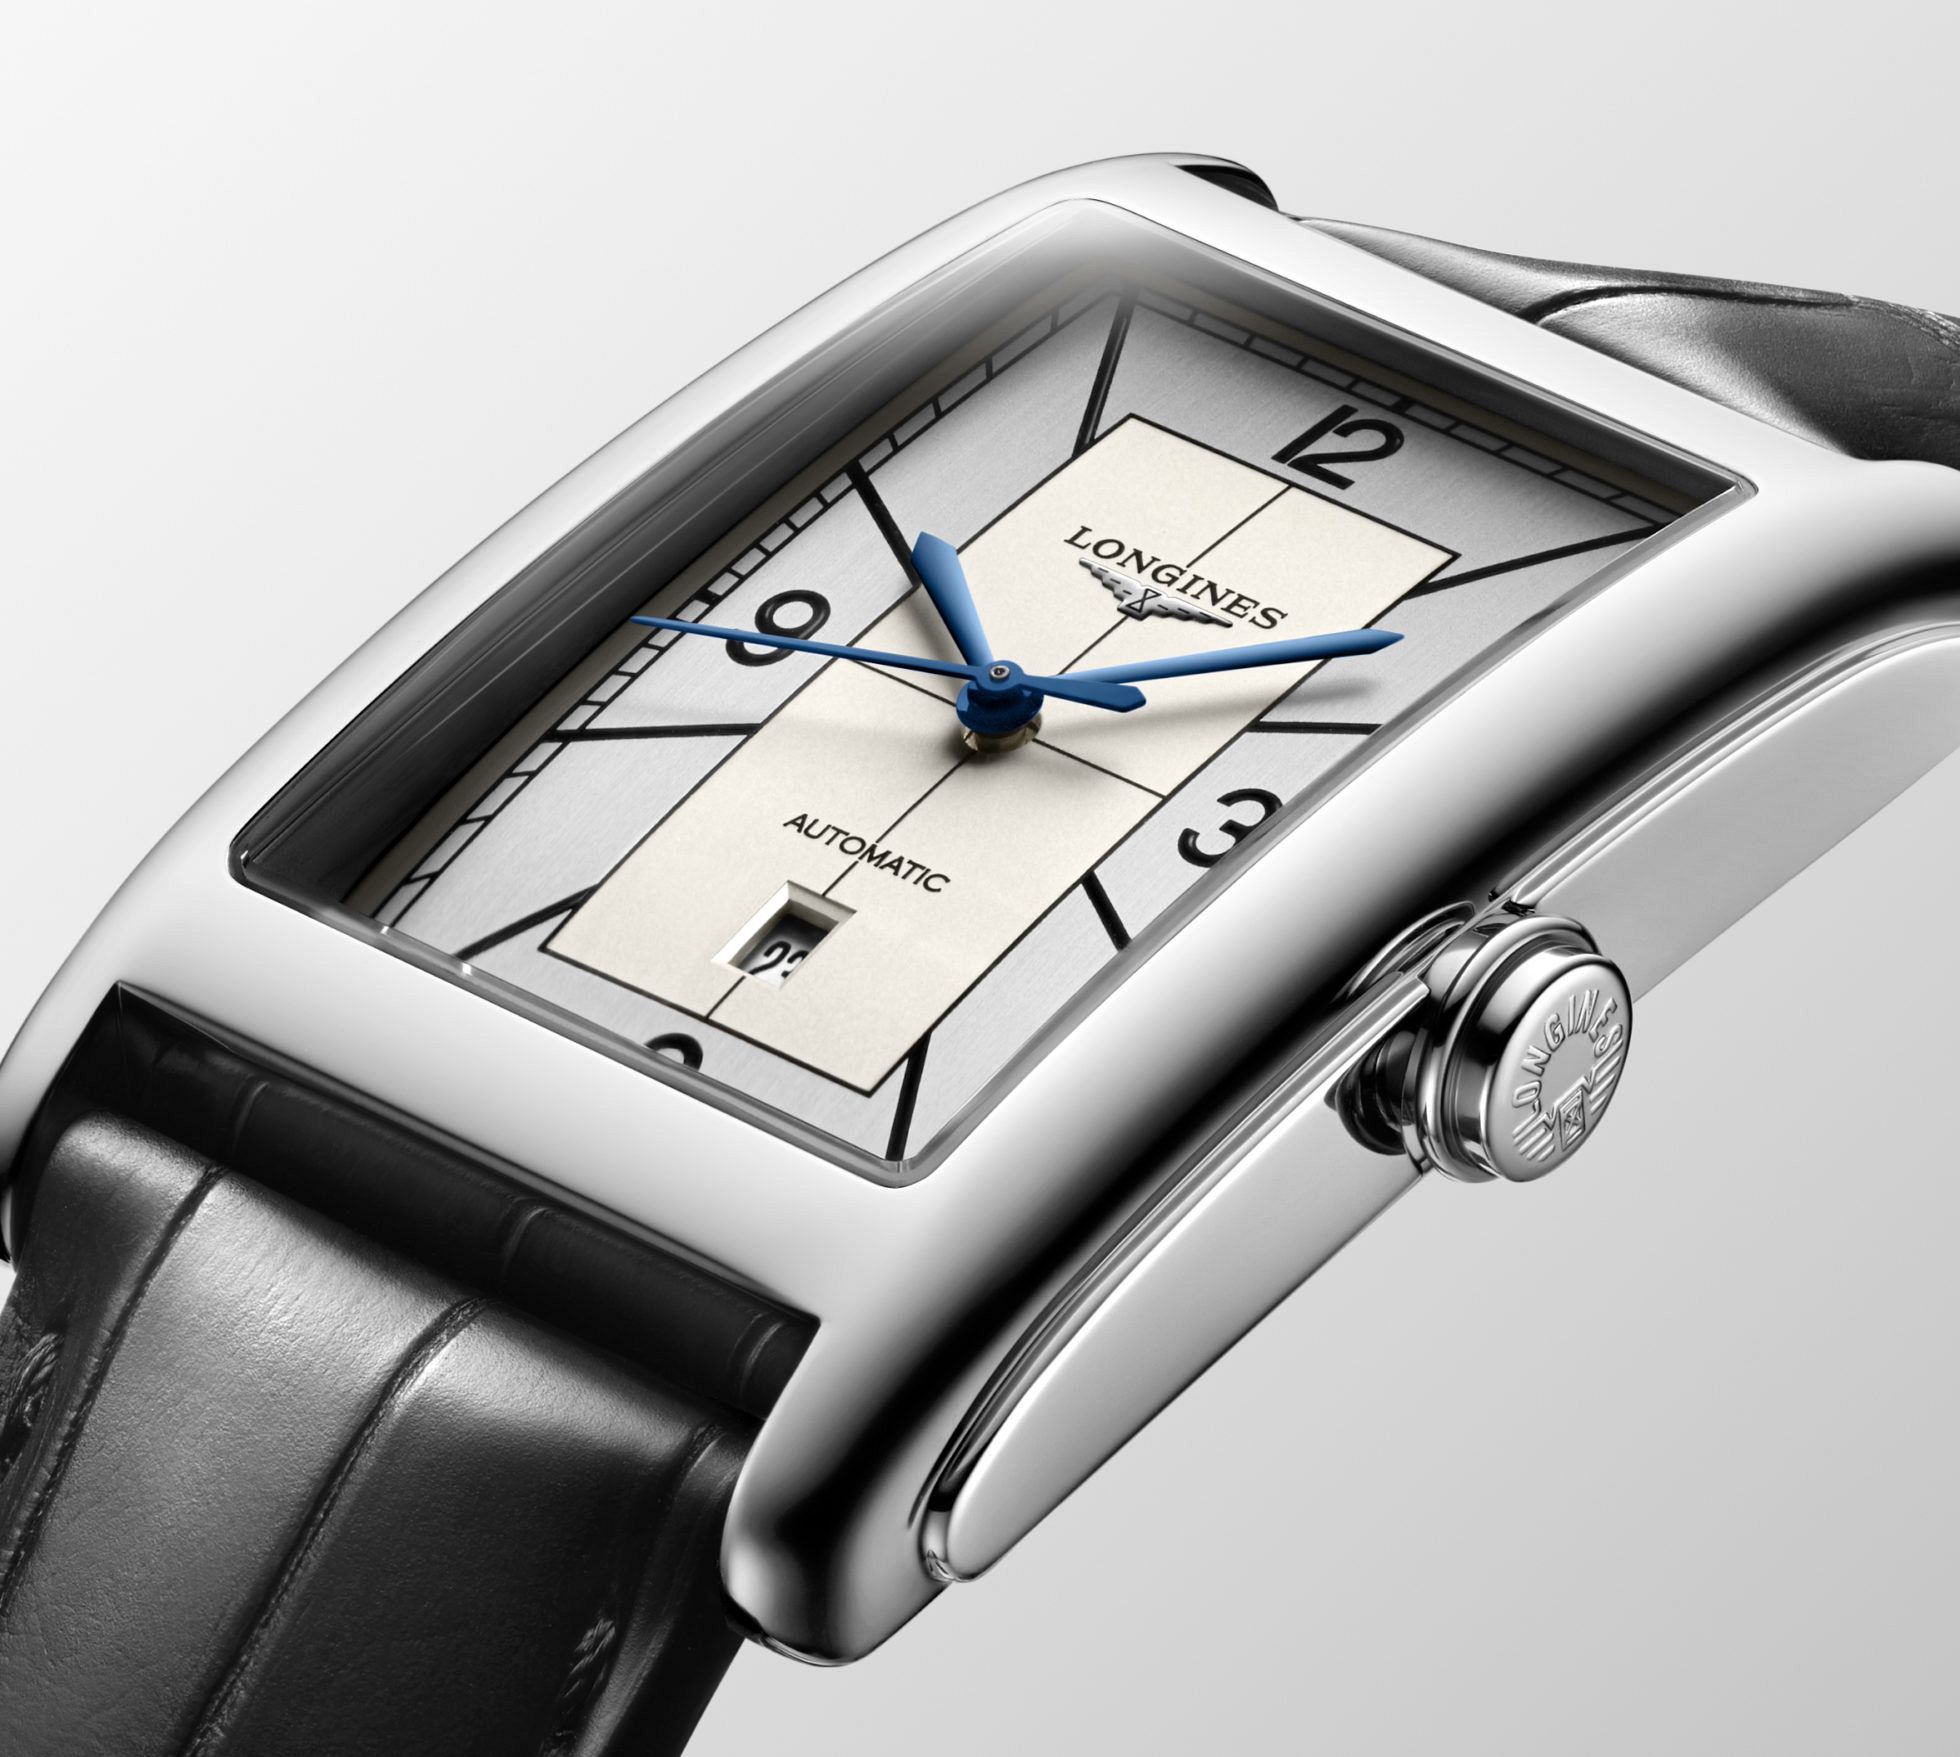 The Longines DolceVita adds sector dials to its range